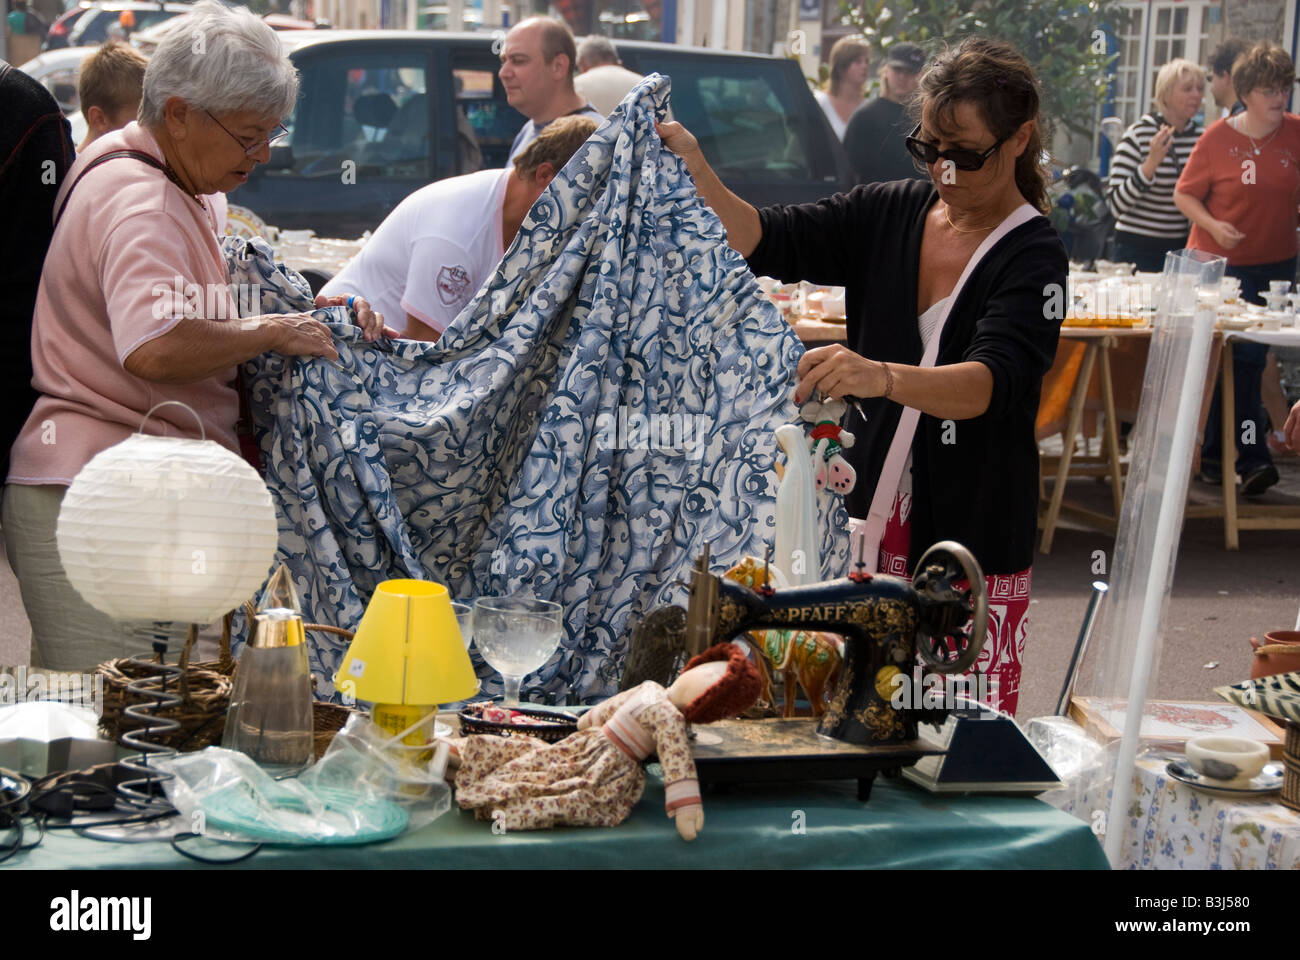 The weekly market at Barneville, Normandy, France. Two customers inspect curtains from a bric a brac stall Stock Photo